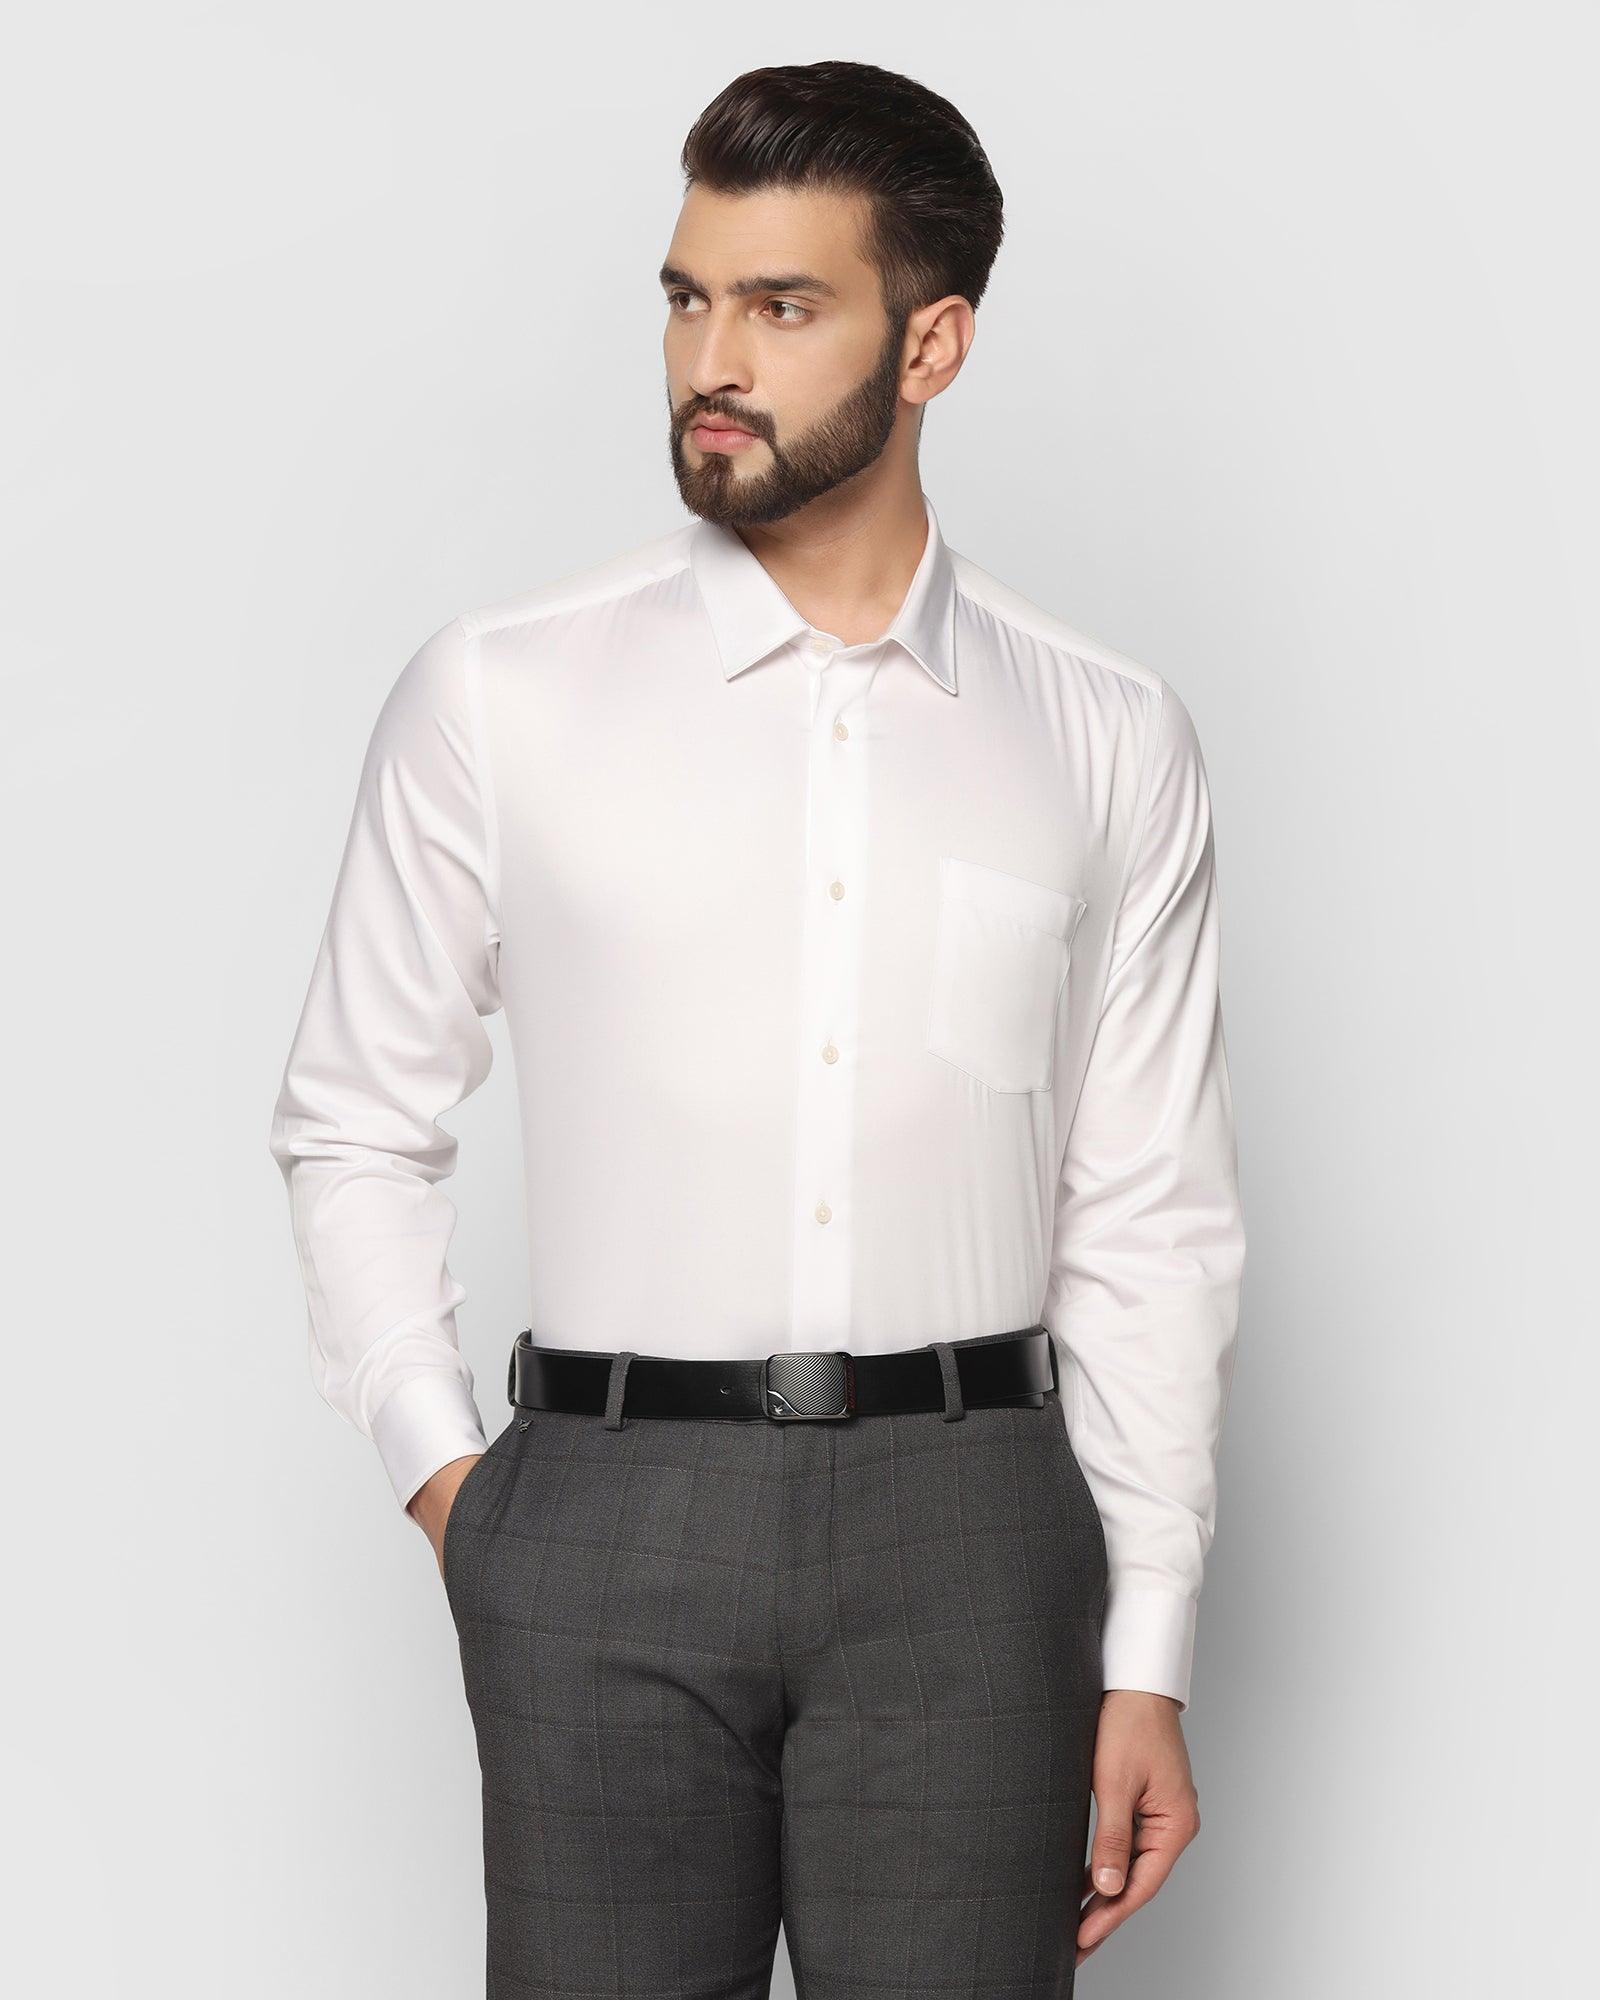 Personalized Formal White Solid Shirt - Sailor